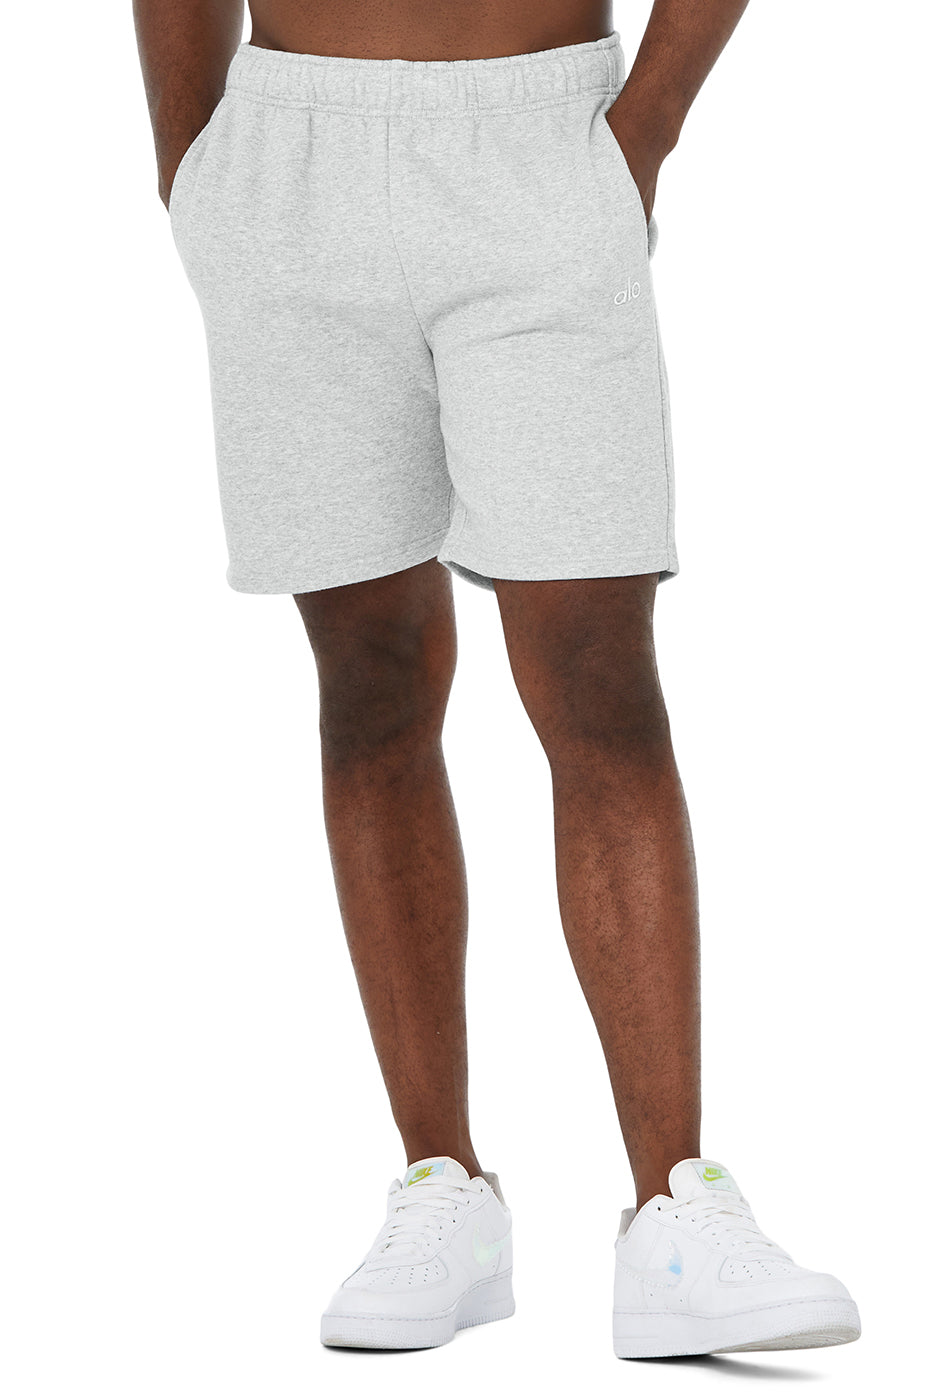 Chill Short - Athletic Heather Grey